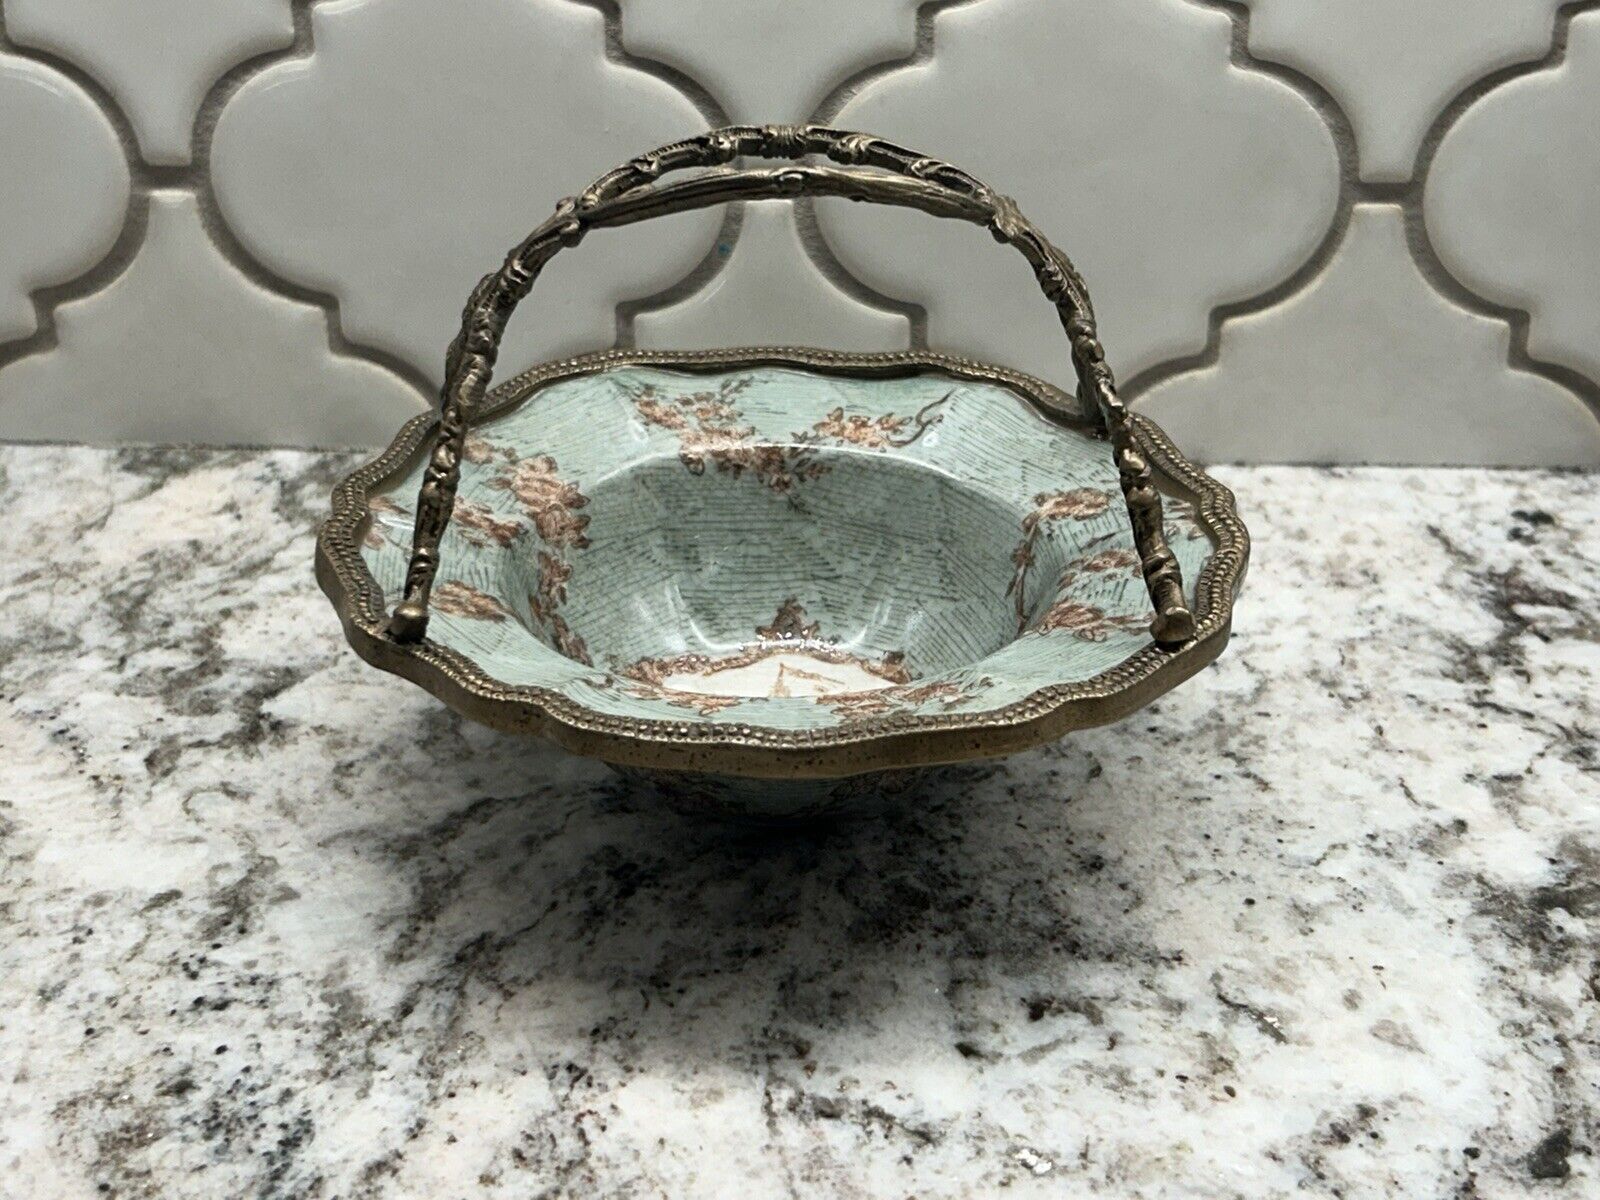 Porcelain Hand Painted Bowl/ Basket With Bronze Handle By Wong Lee 1895